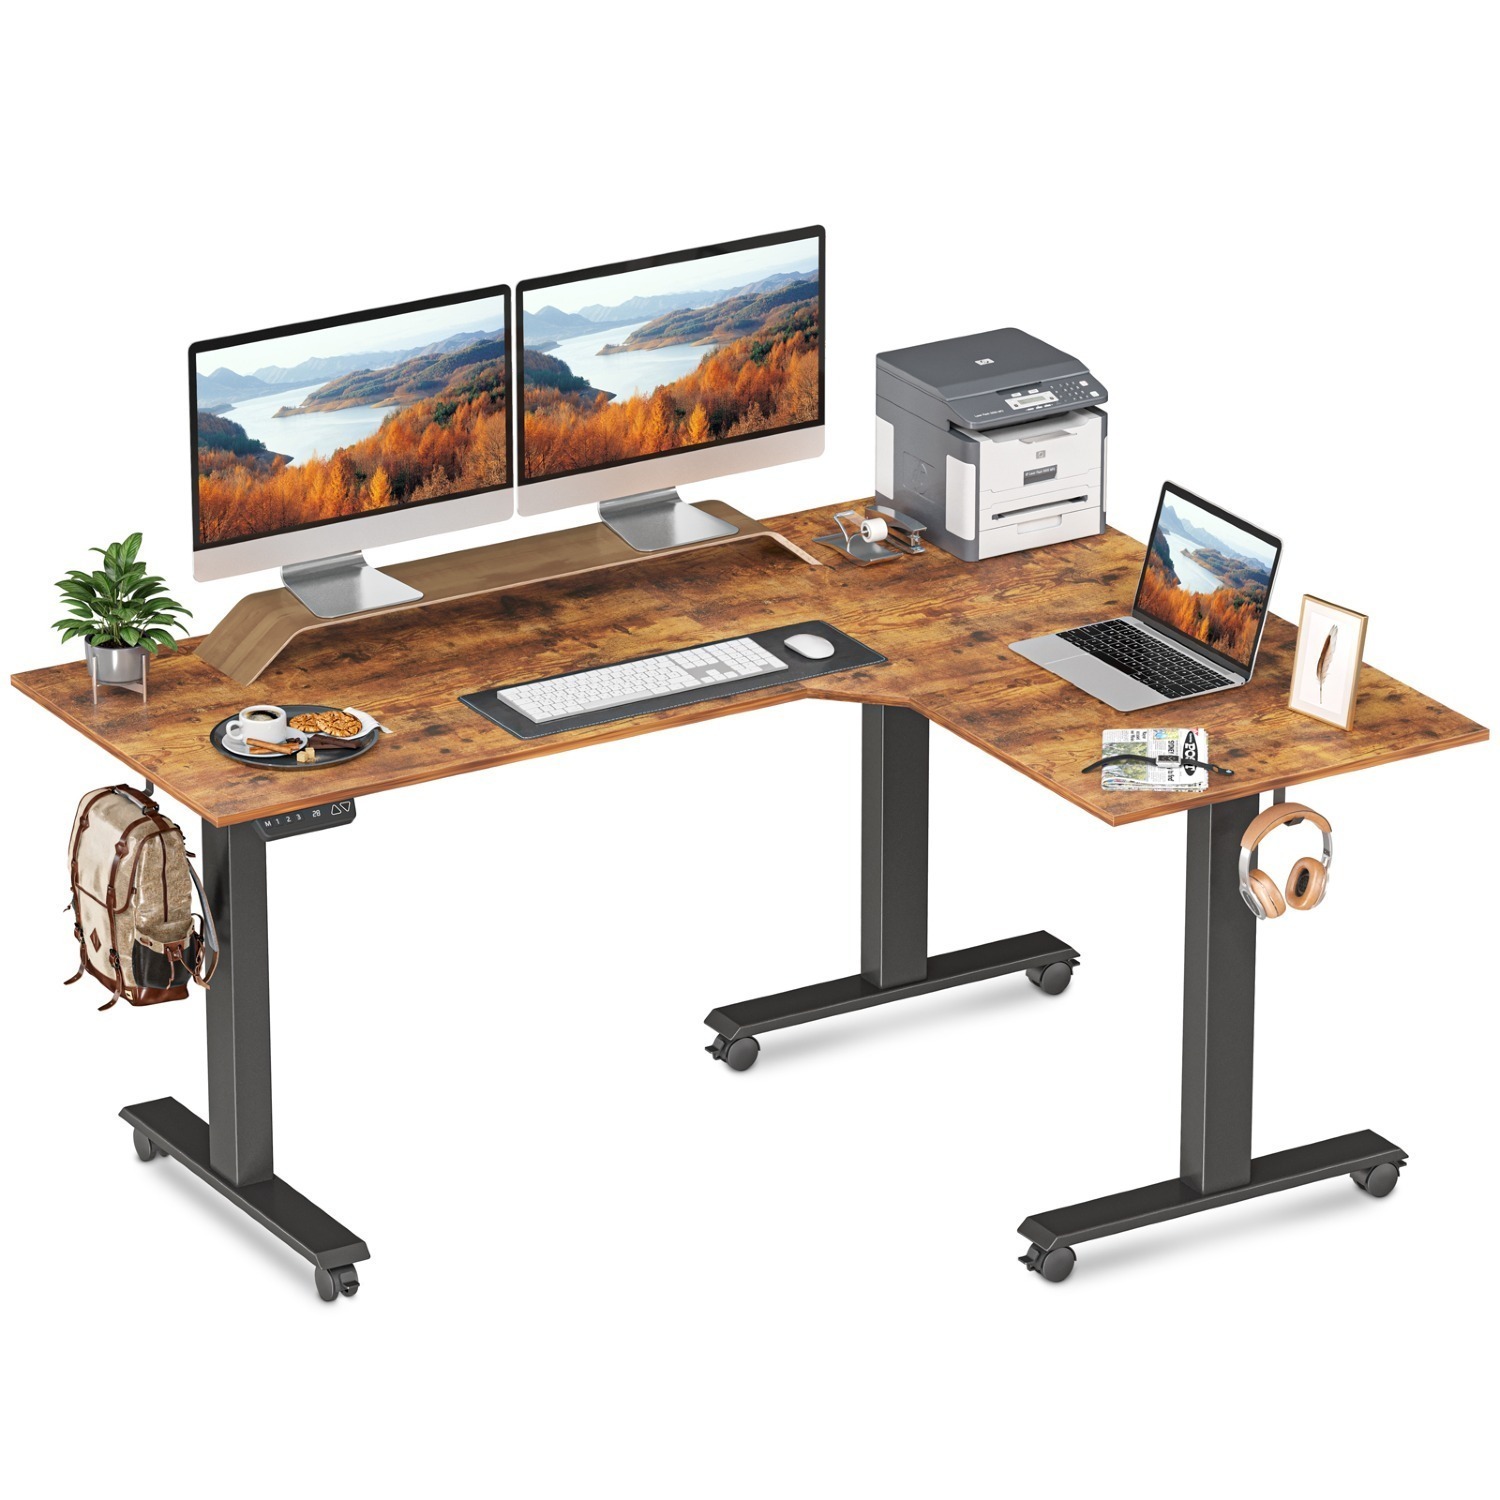 FEZIBO Triple Motor L-Shaped Electric Standing Desk, 63 Inches Height Adjustable Stand up Corner Desk $469.99 + FS with PRIME